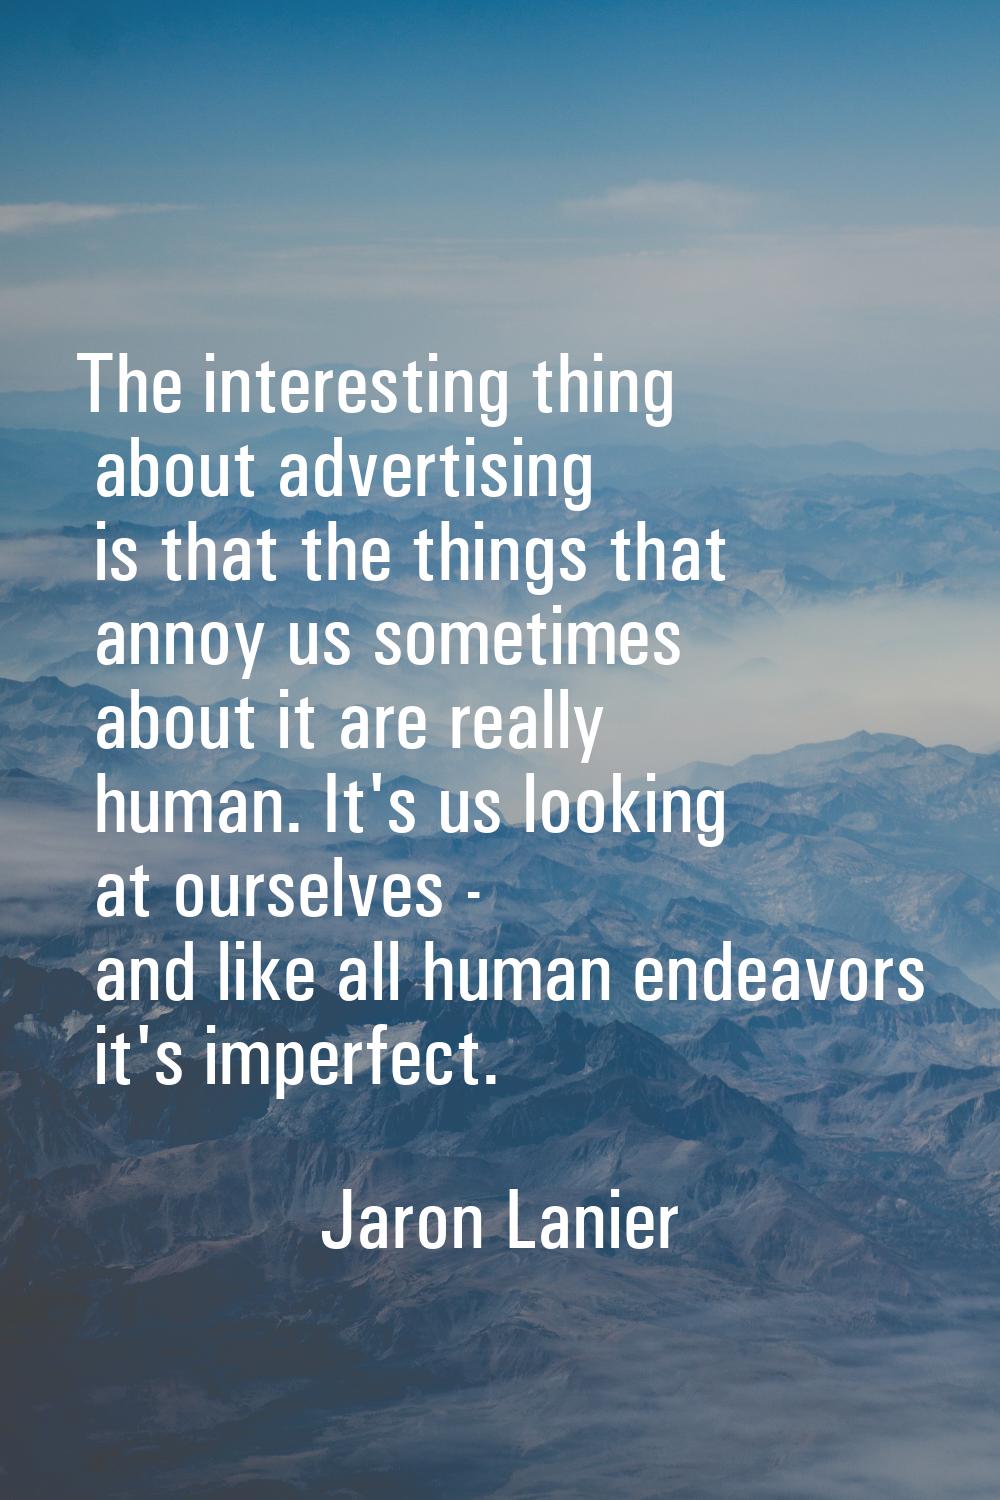 The interesting thing about advertising is that the things that annoy us sometimes about it are rea